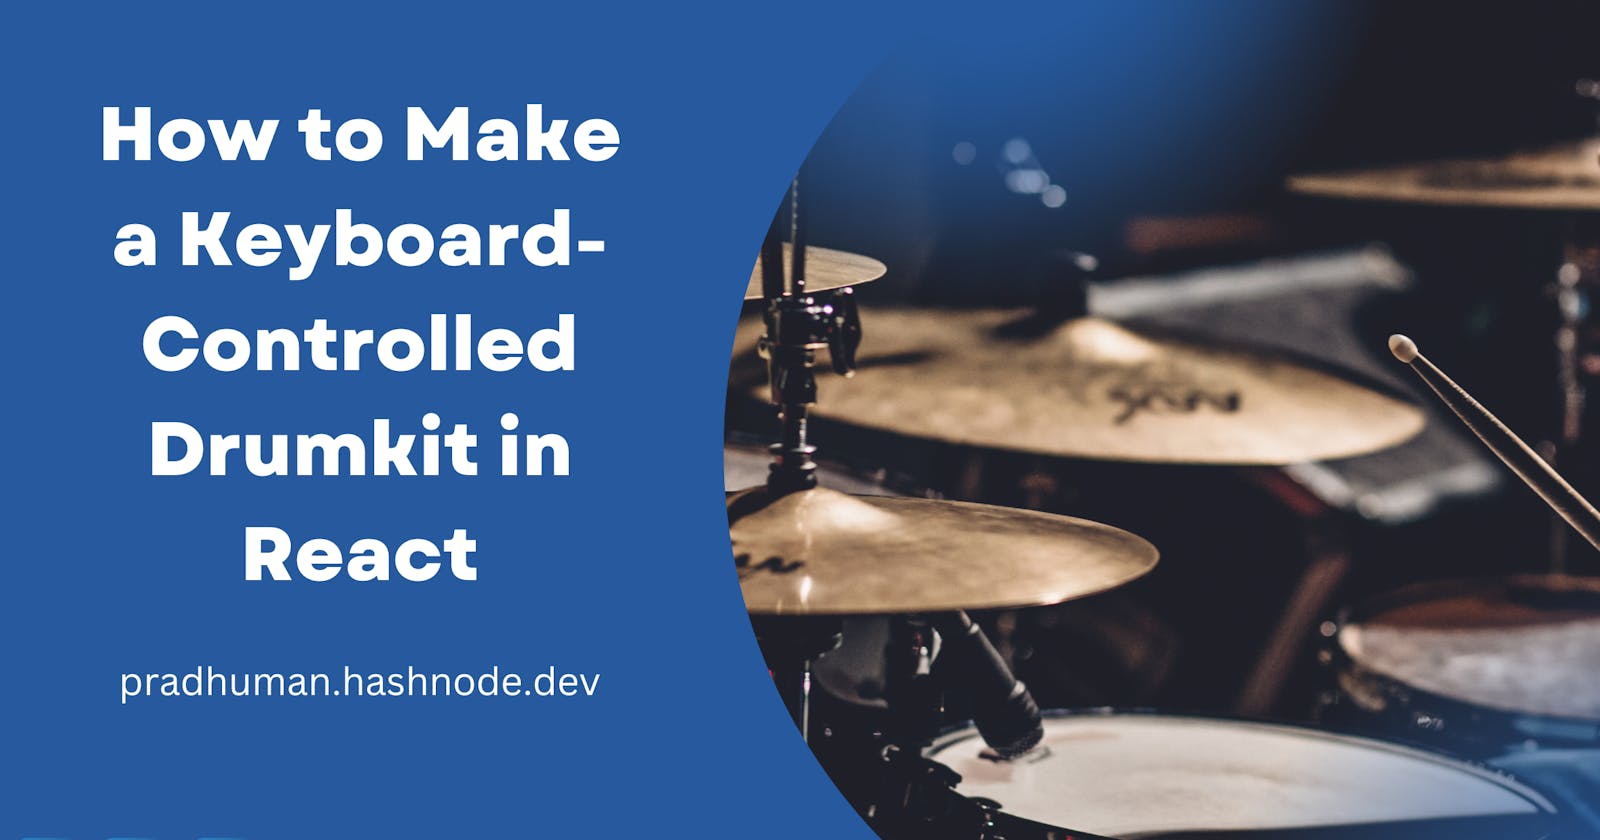 How to Make a Keyboard-Controlled Drumkit in React